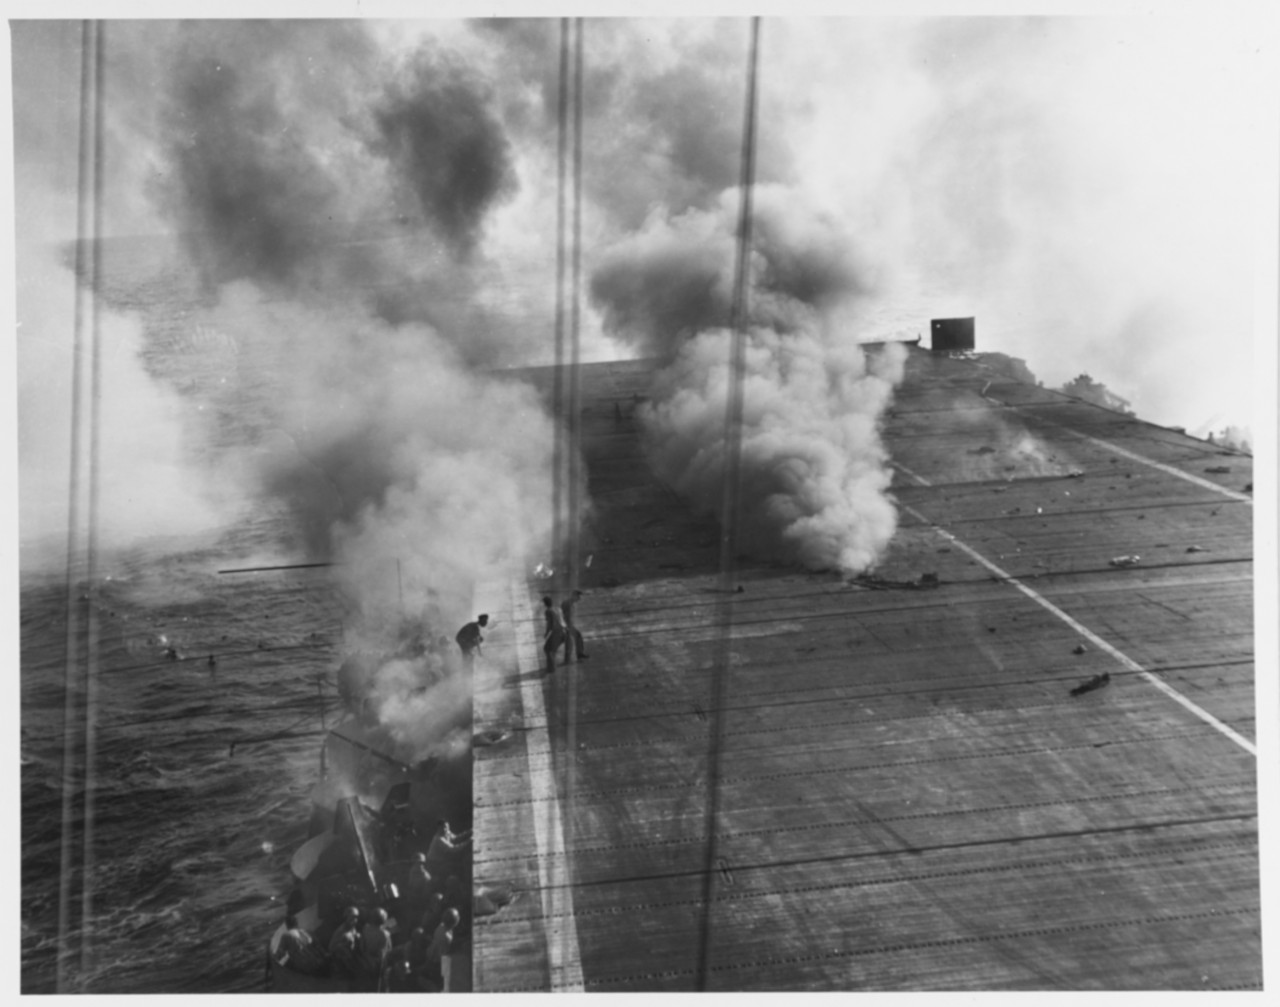 Crewman move from the galleries of USS Suwanee (CVE-27) to repair kamikaze damage to the after part of the flight deck, 25 October 1944. Smoke comes from fire in the hangar. Note men in the water.